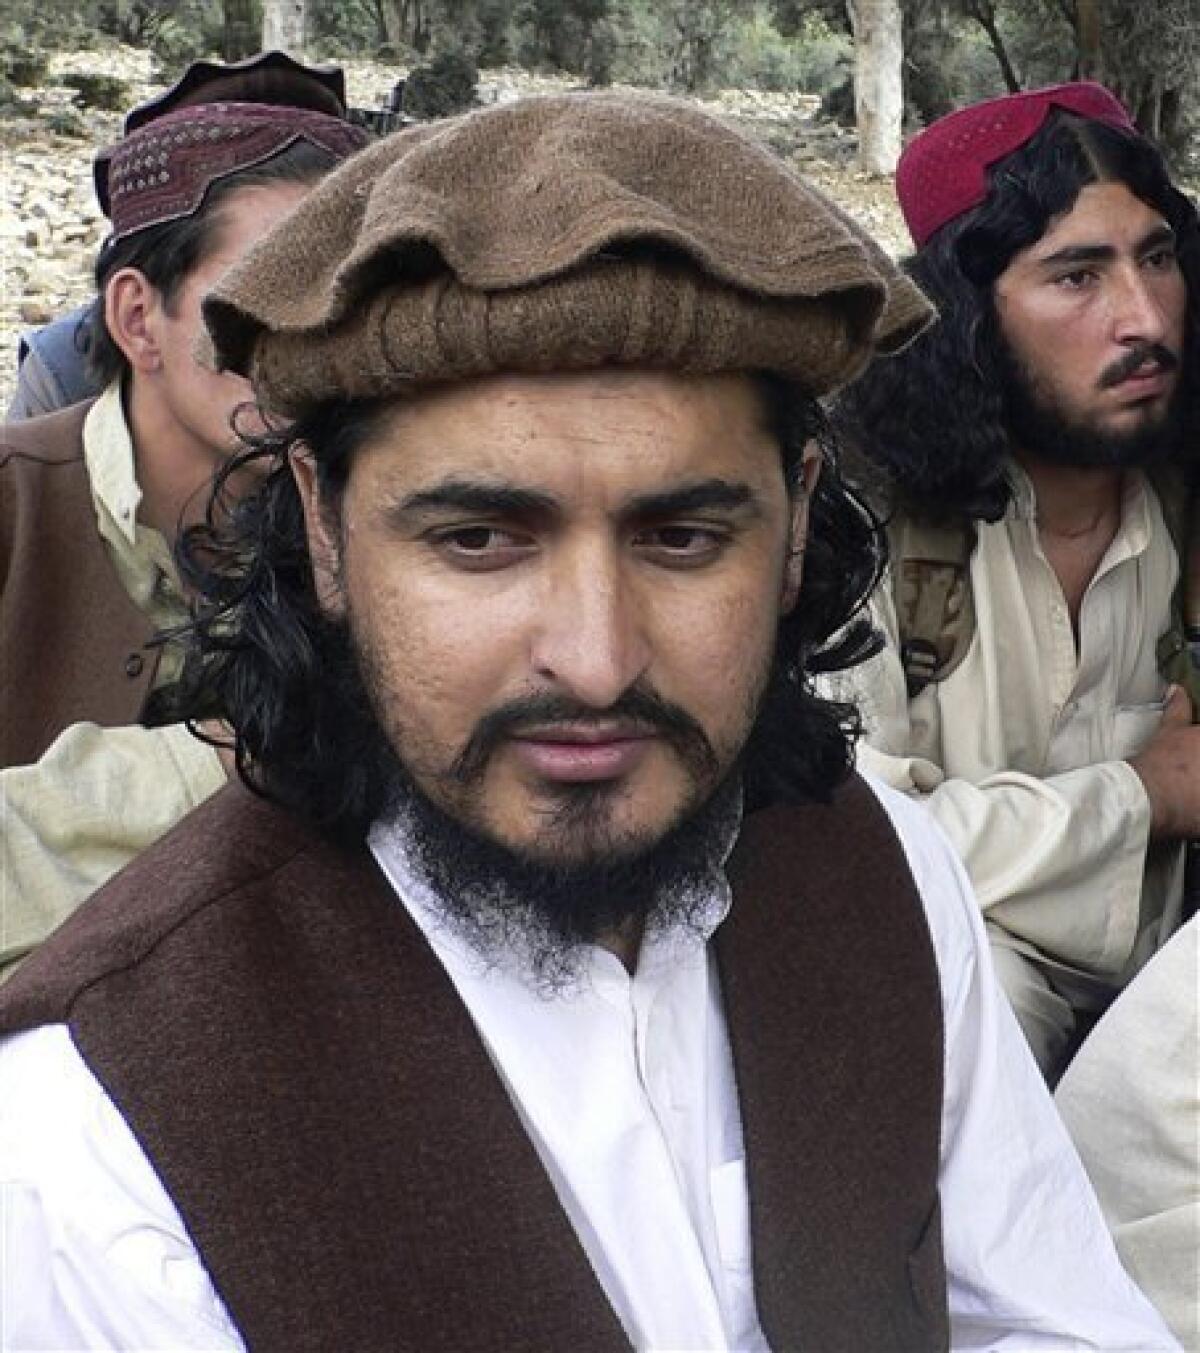 FILE - In this Oct. 4, 2009 file photo, Pakistani Taliban chief Hakimullah Mehsud sits during his meeting with media in Sararogha of Pakistani tribal area of South Waziristan along the Afghanistan border. Two new videos from the Pakistani Taliban appear to show their leader Hakimullah Mehsud alive and refuting earlier American and Pakistani claims that he was killed in a U.S. missile strike earlier this year, monitoring groups said Monday, May 3, 2010. The videos featuring Mehsud surfaced over the weekend after an attempted car bombing in New York City, and were the strongest evidence yet that he had survived the January missile attack. (AP Photo/Ishtiaq Mehsud, File)